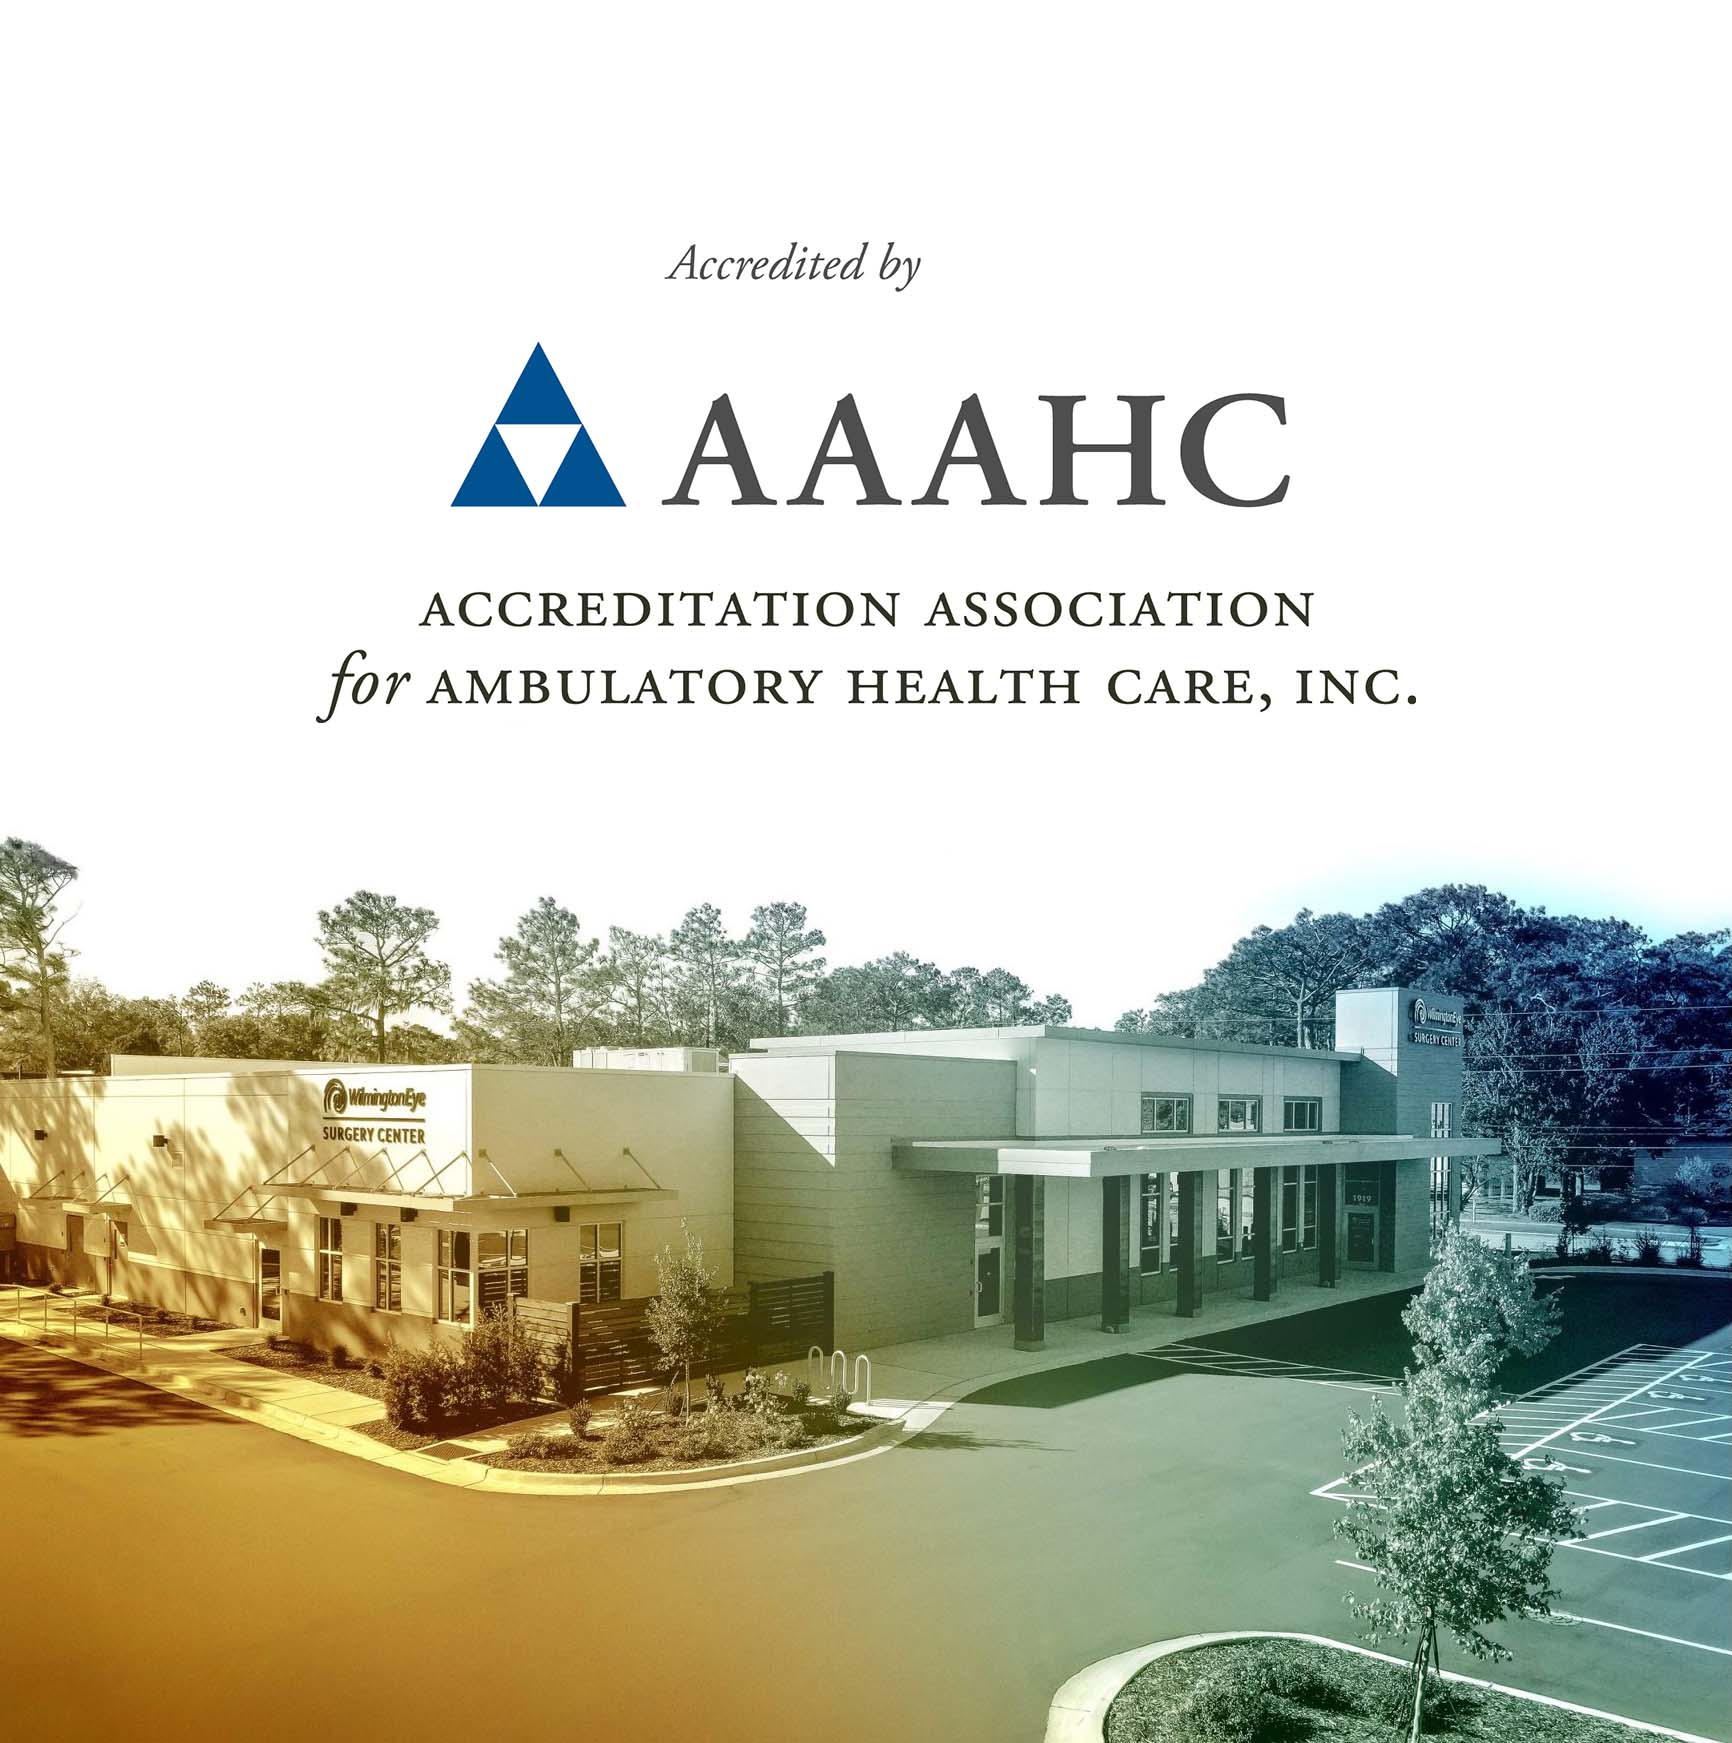 AAAHC Logo Above Image of Building